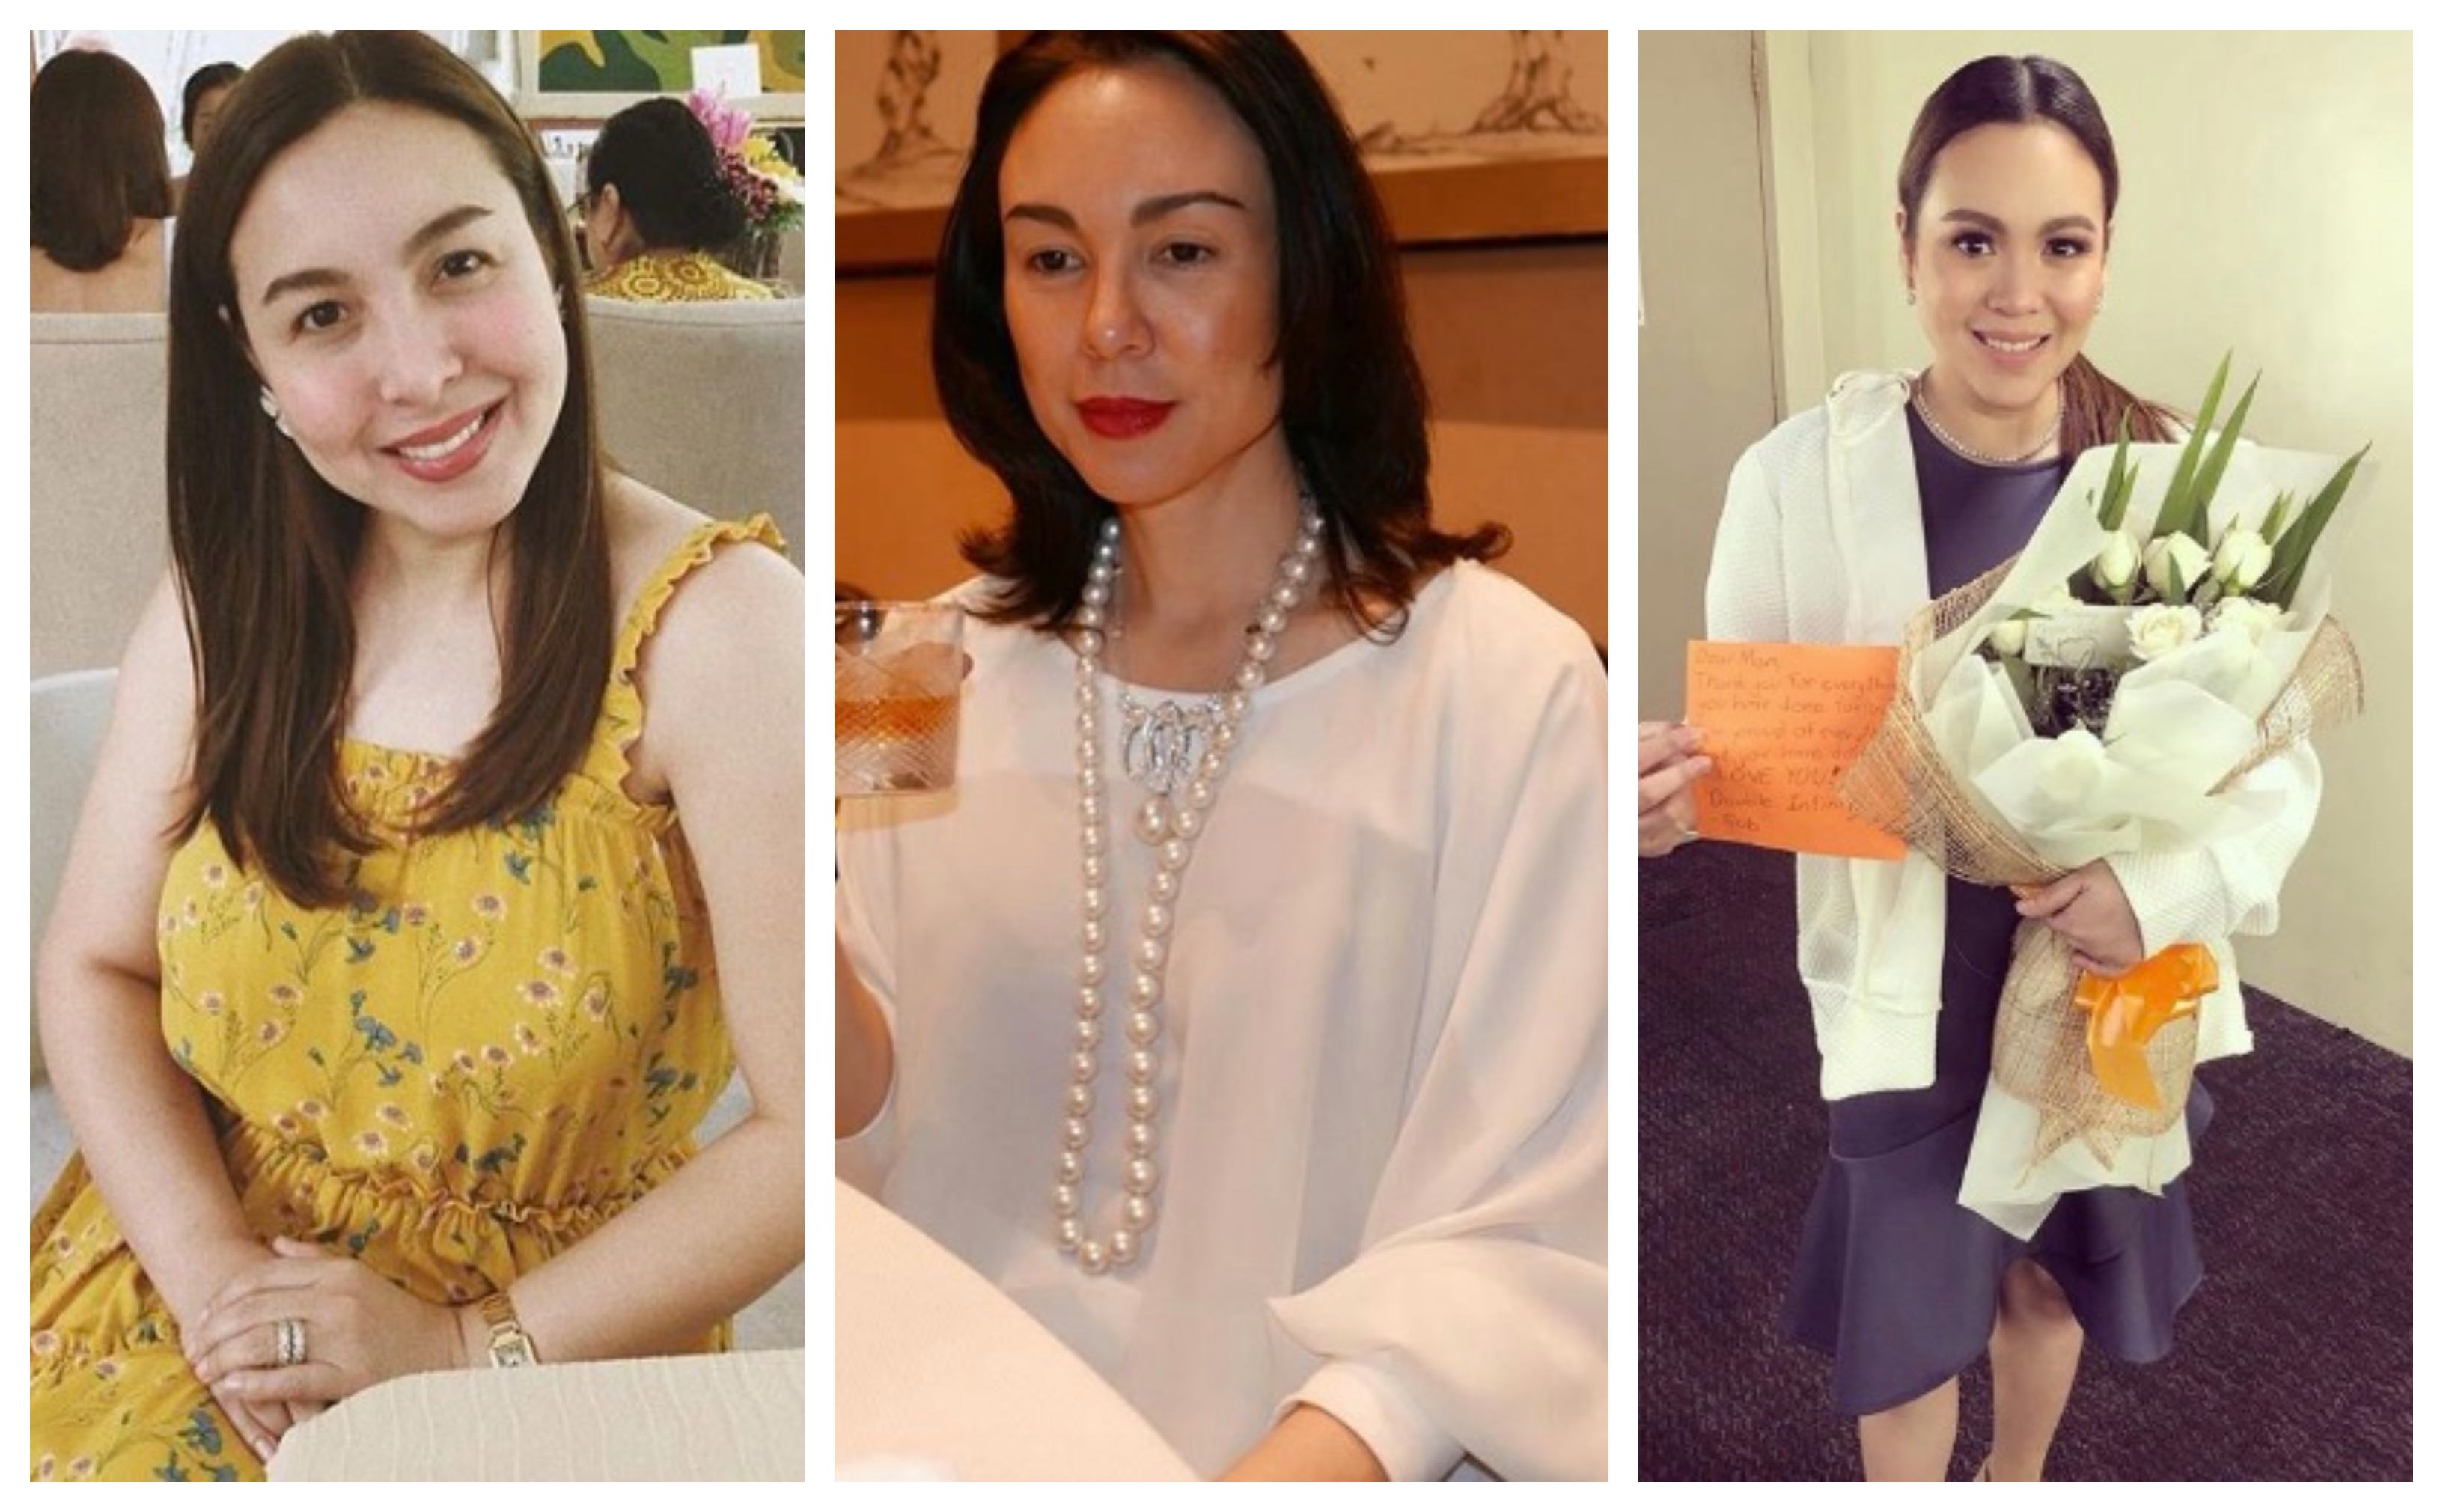 Sisters Marjorie, Gretchen, and Claudine Barretto. <i></noscript>Photos: Marjorie, Claudine, and Gretchen’s IG</i>